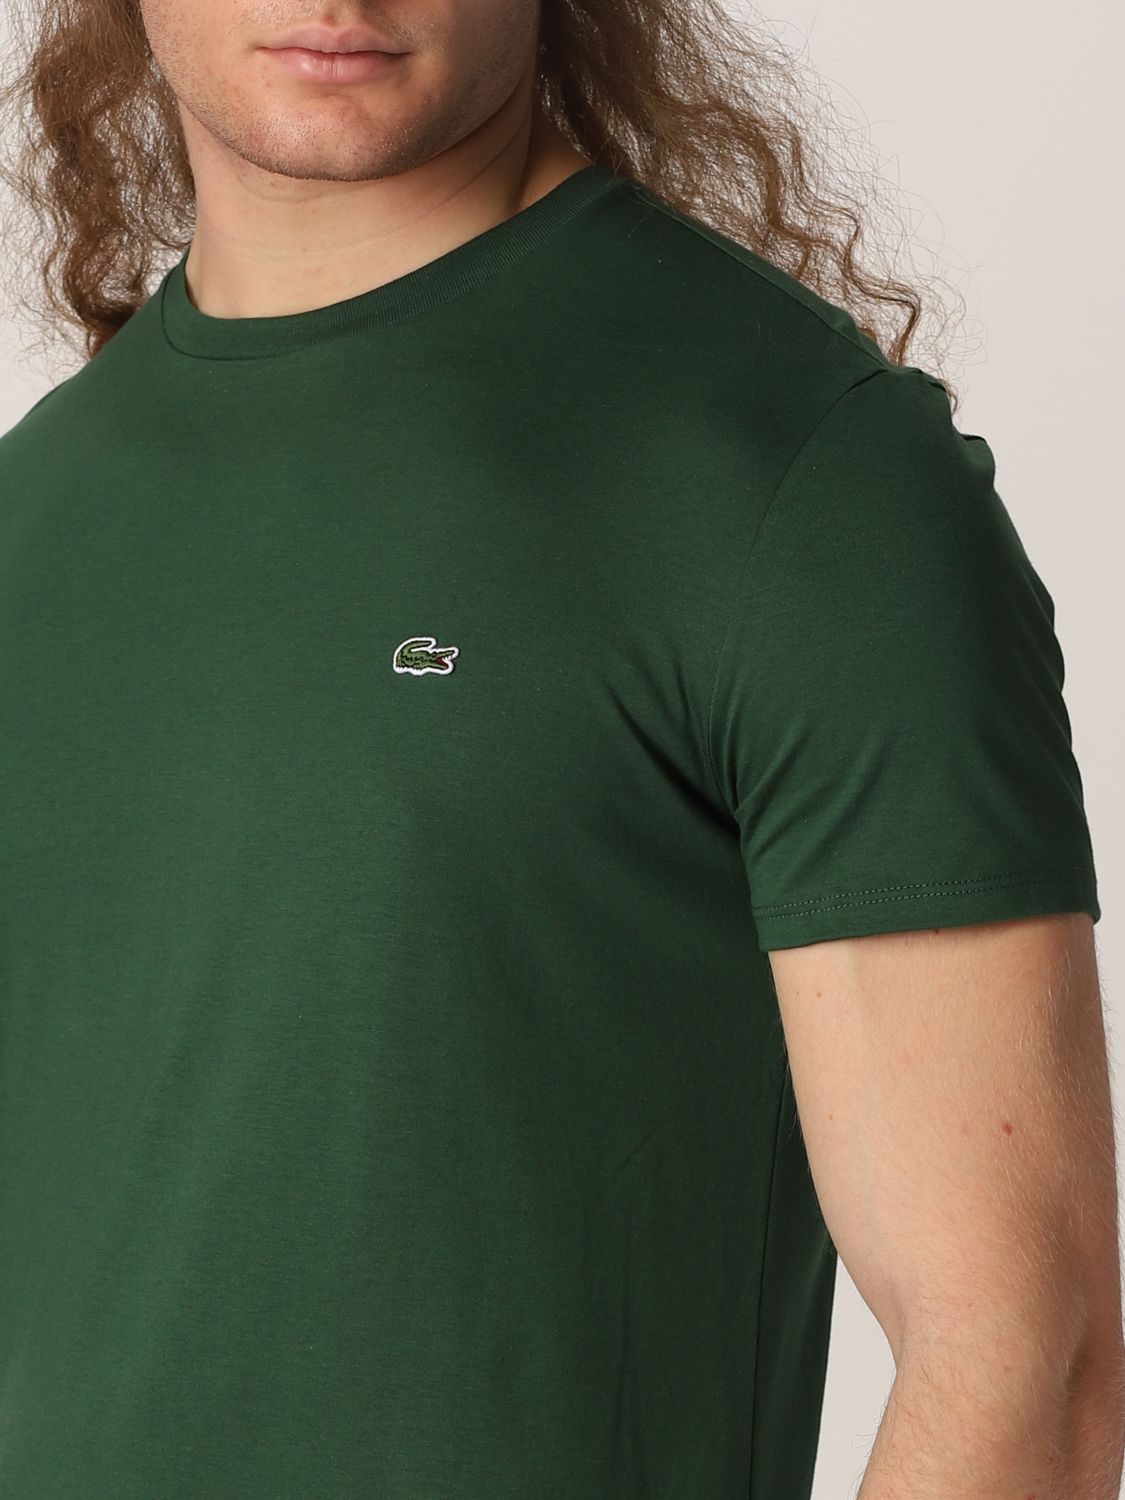 Lacoste t-shirt for man - Green | Lacoste t-shirt TH6709 online at GIGLIO.COM